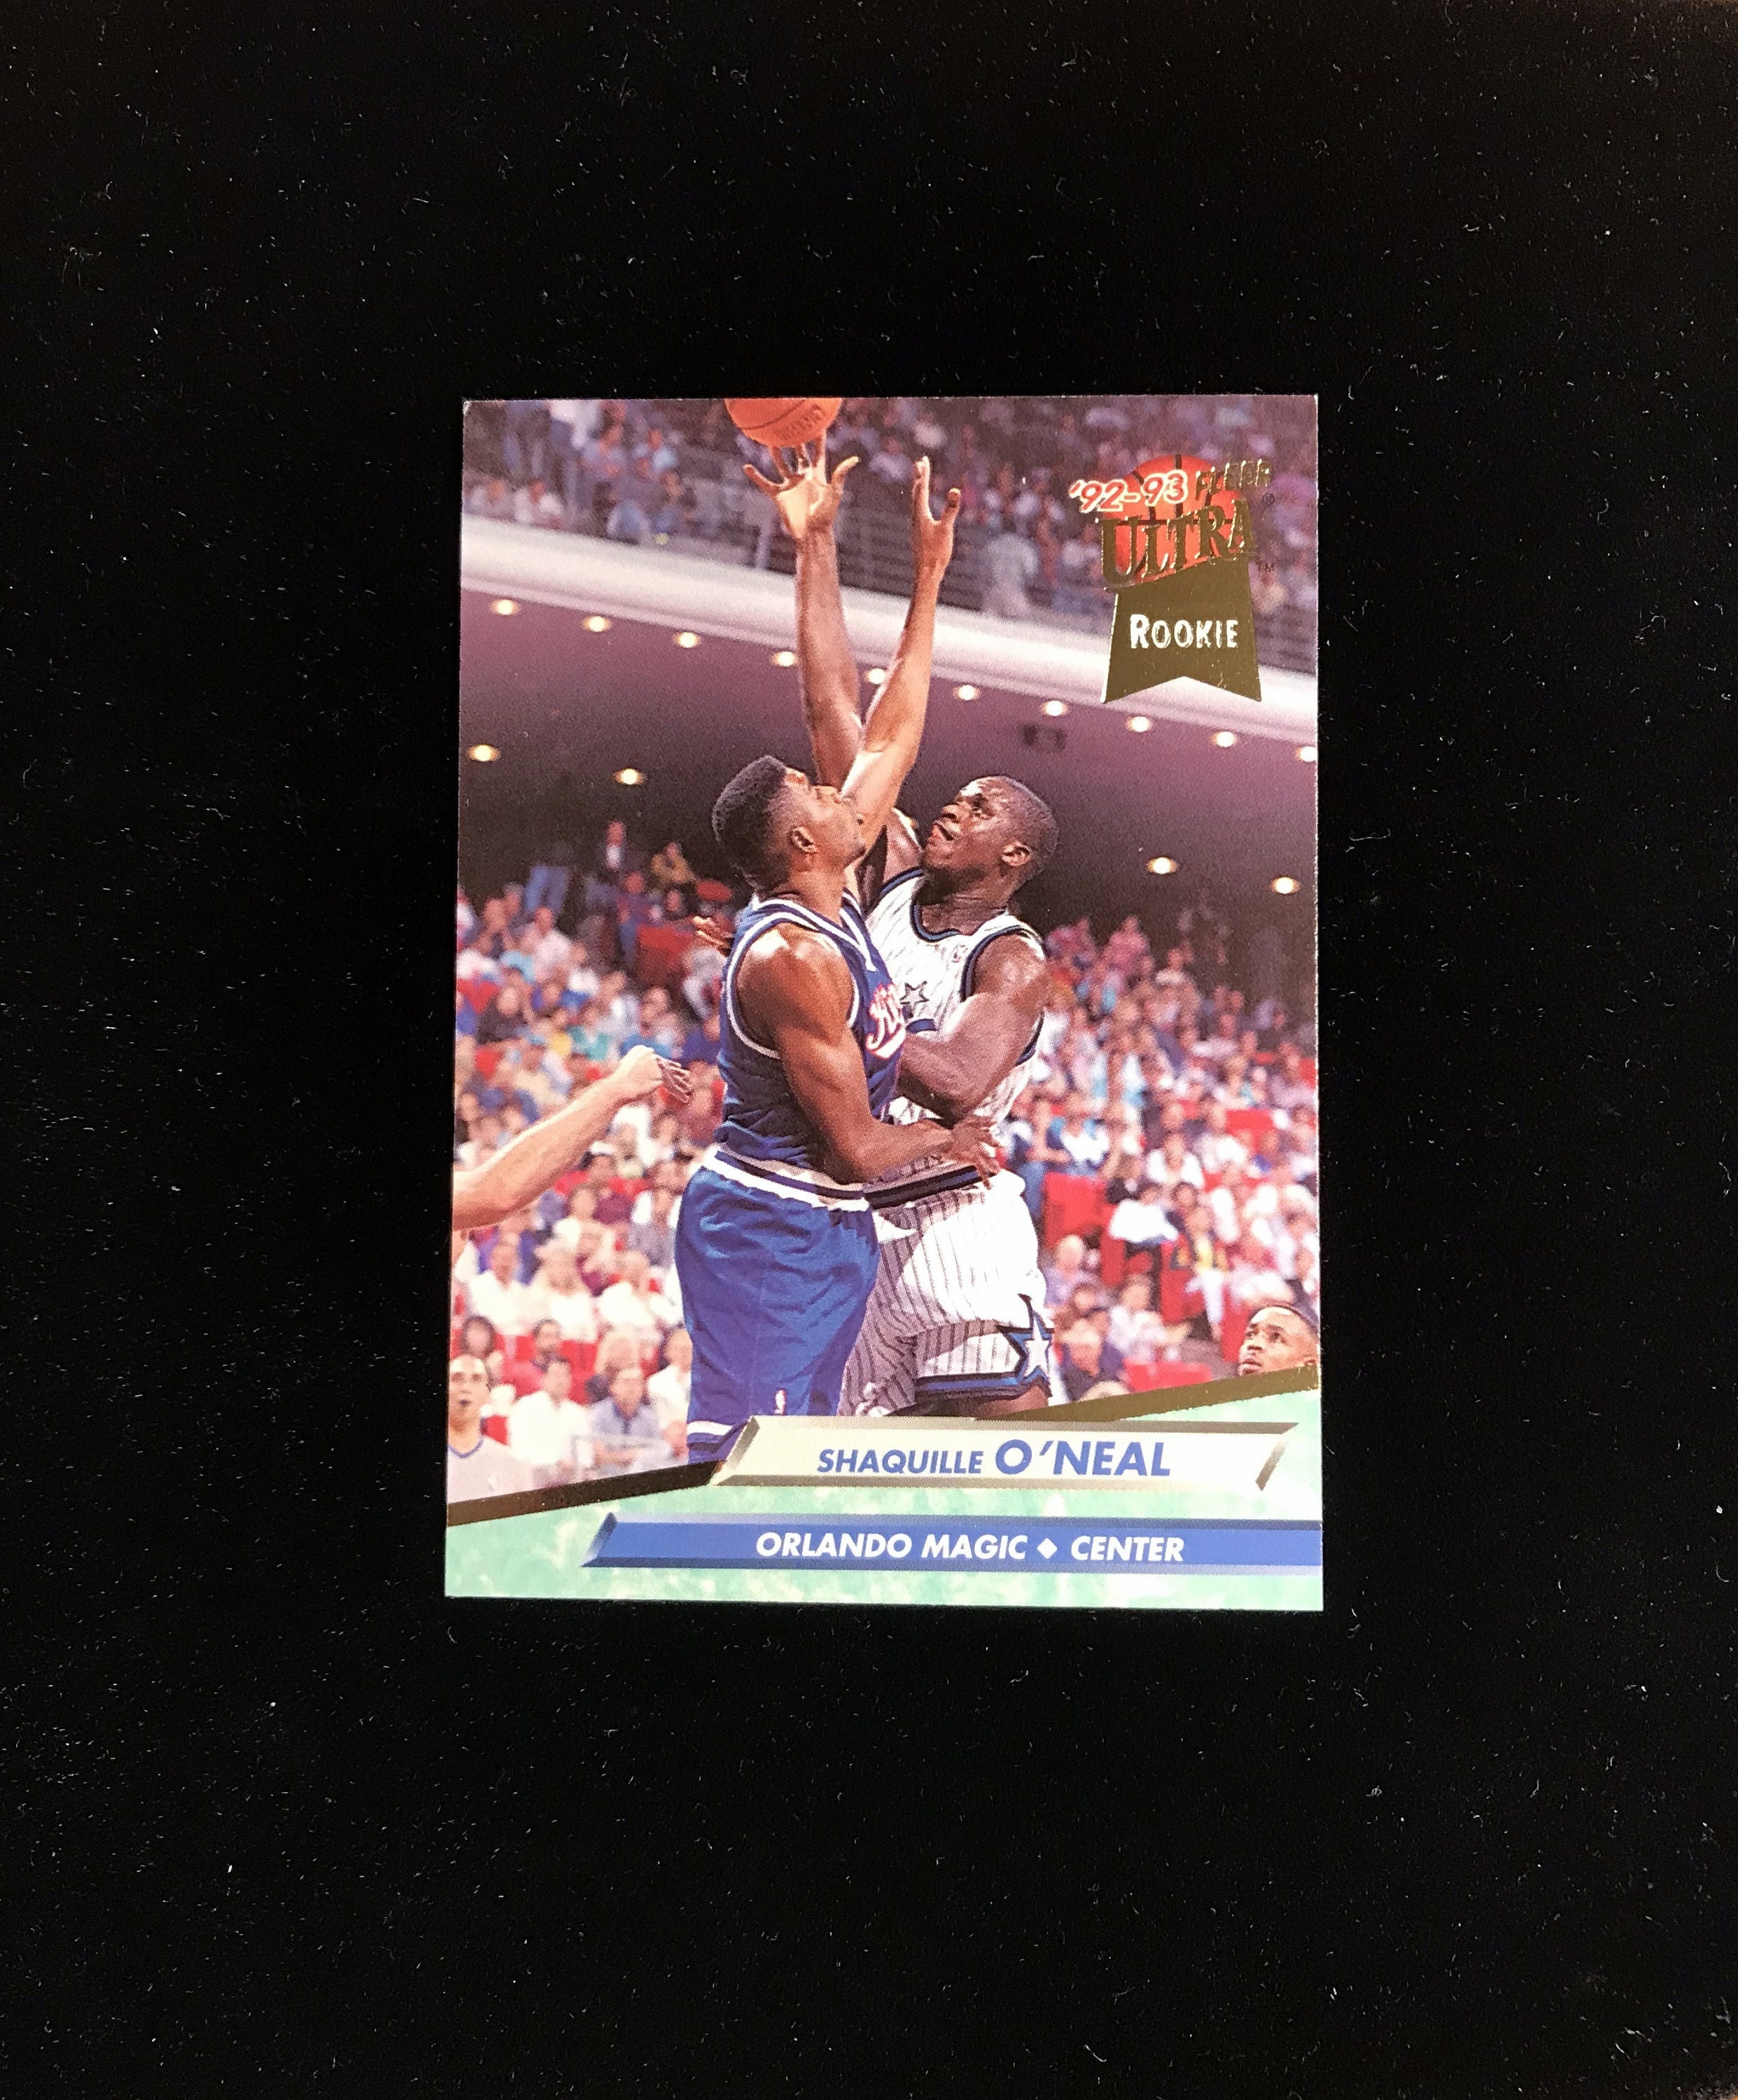 1992-93 Upper Deck McDonald's Basketball #P43 Shaquille O'Neal Orlando  Magic RC Rookie Official McDonalds UD NBA Trading Card